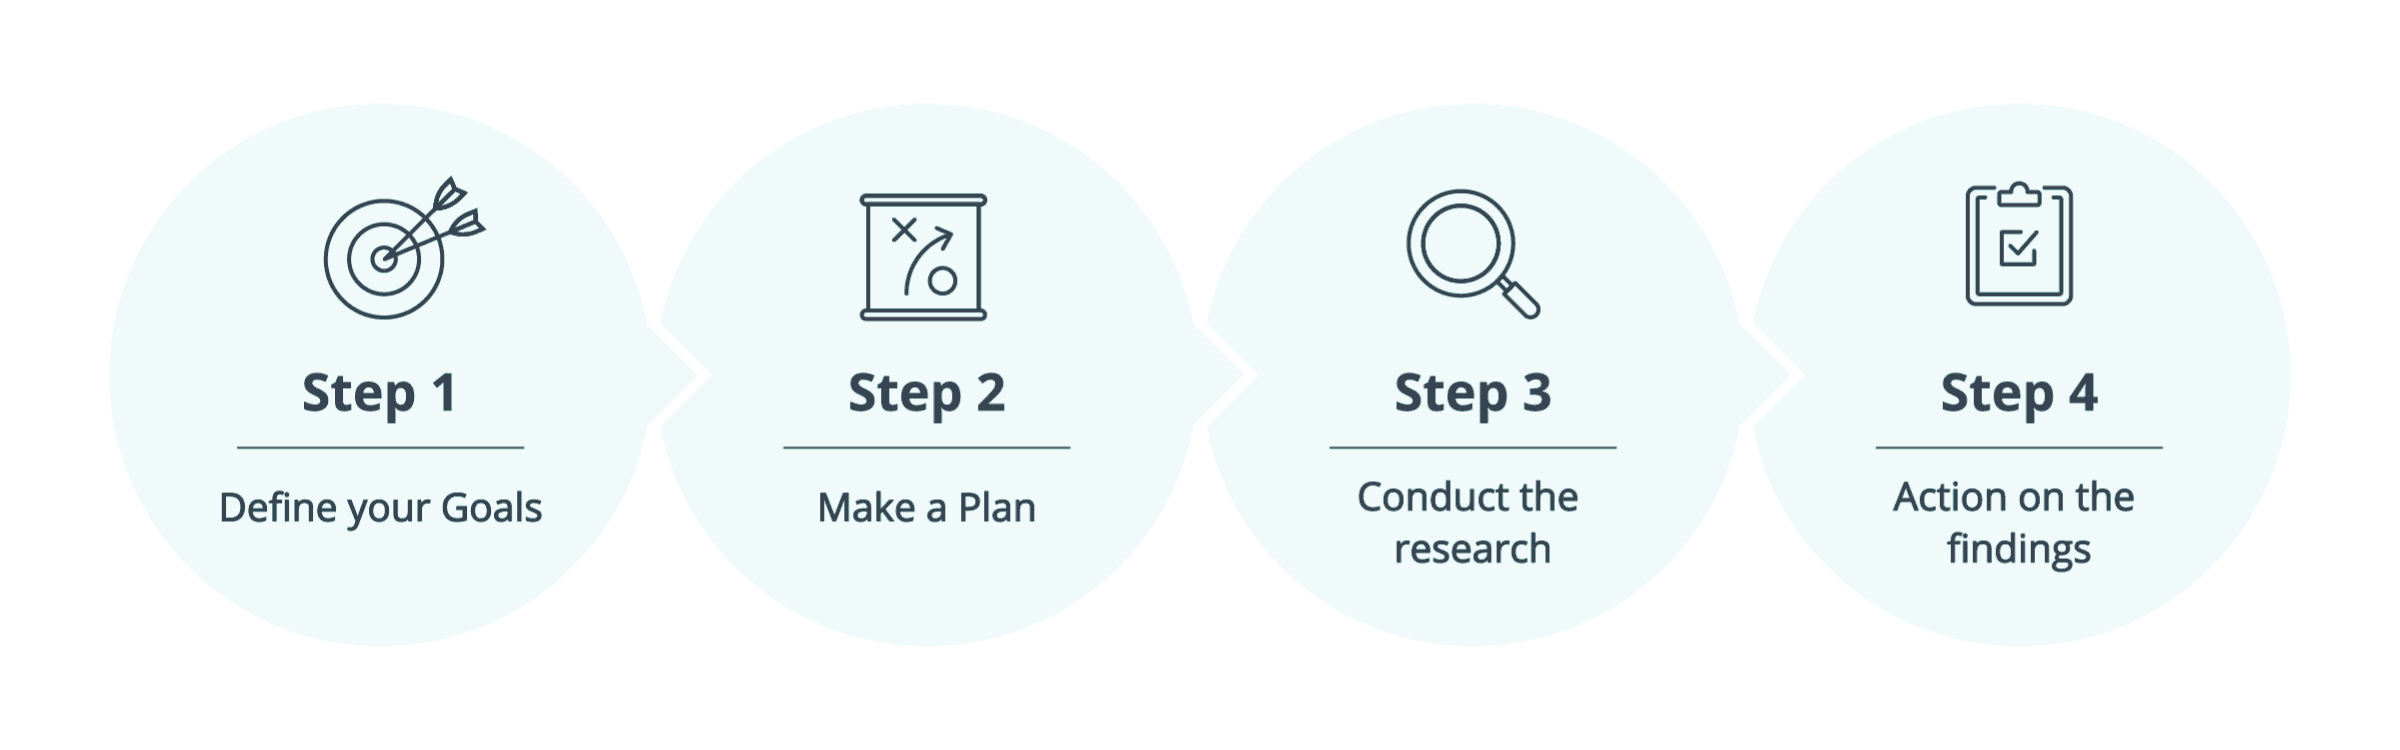 gif of the 4 steps of the customer research process